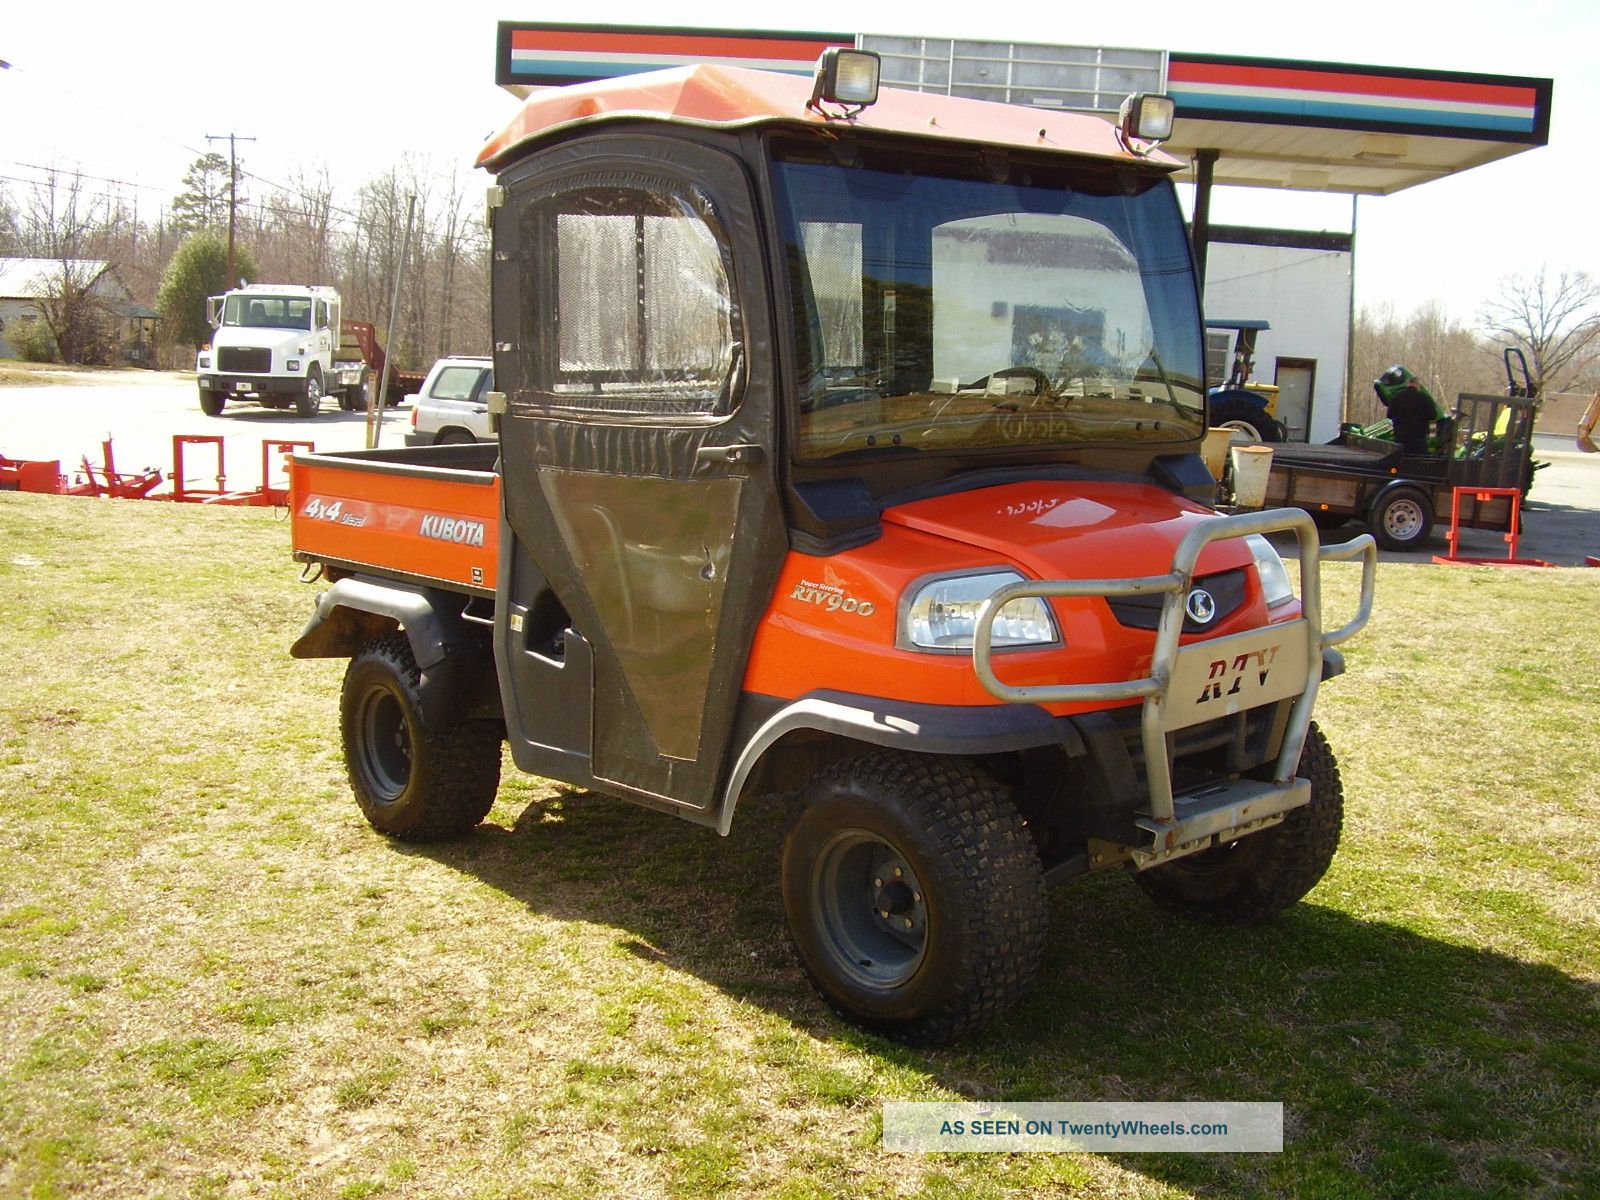 Kubota Rtv 900 Enclosed Cab With Heat 4x4 Only 293 Hours